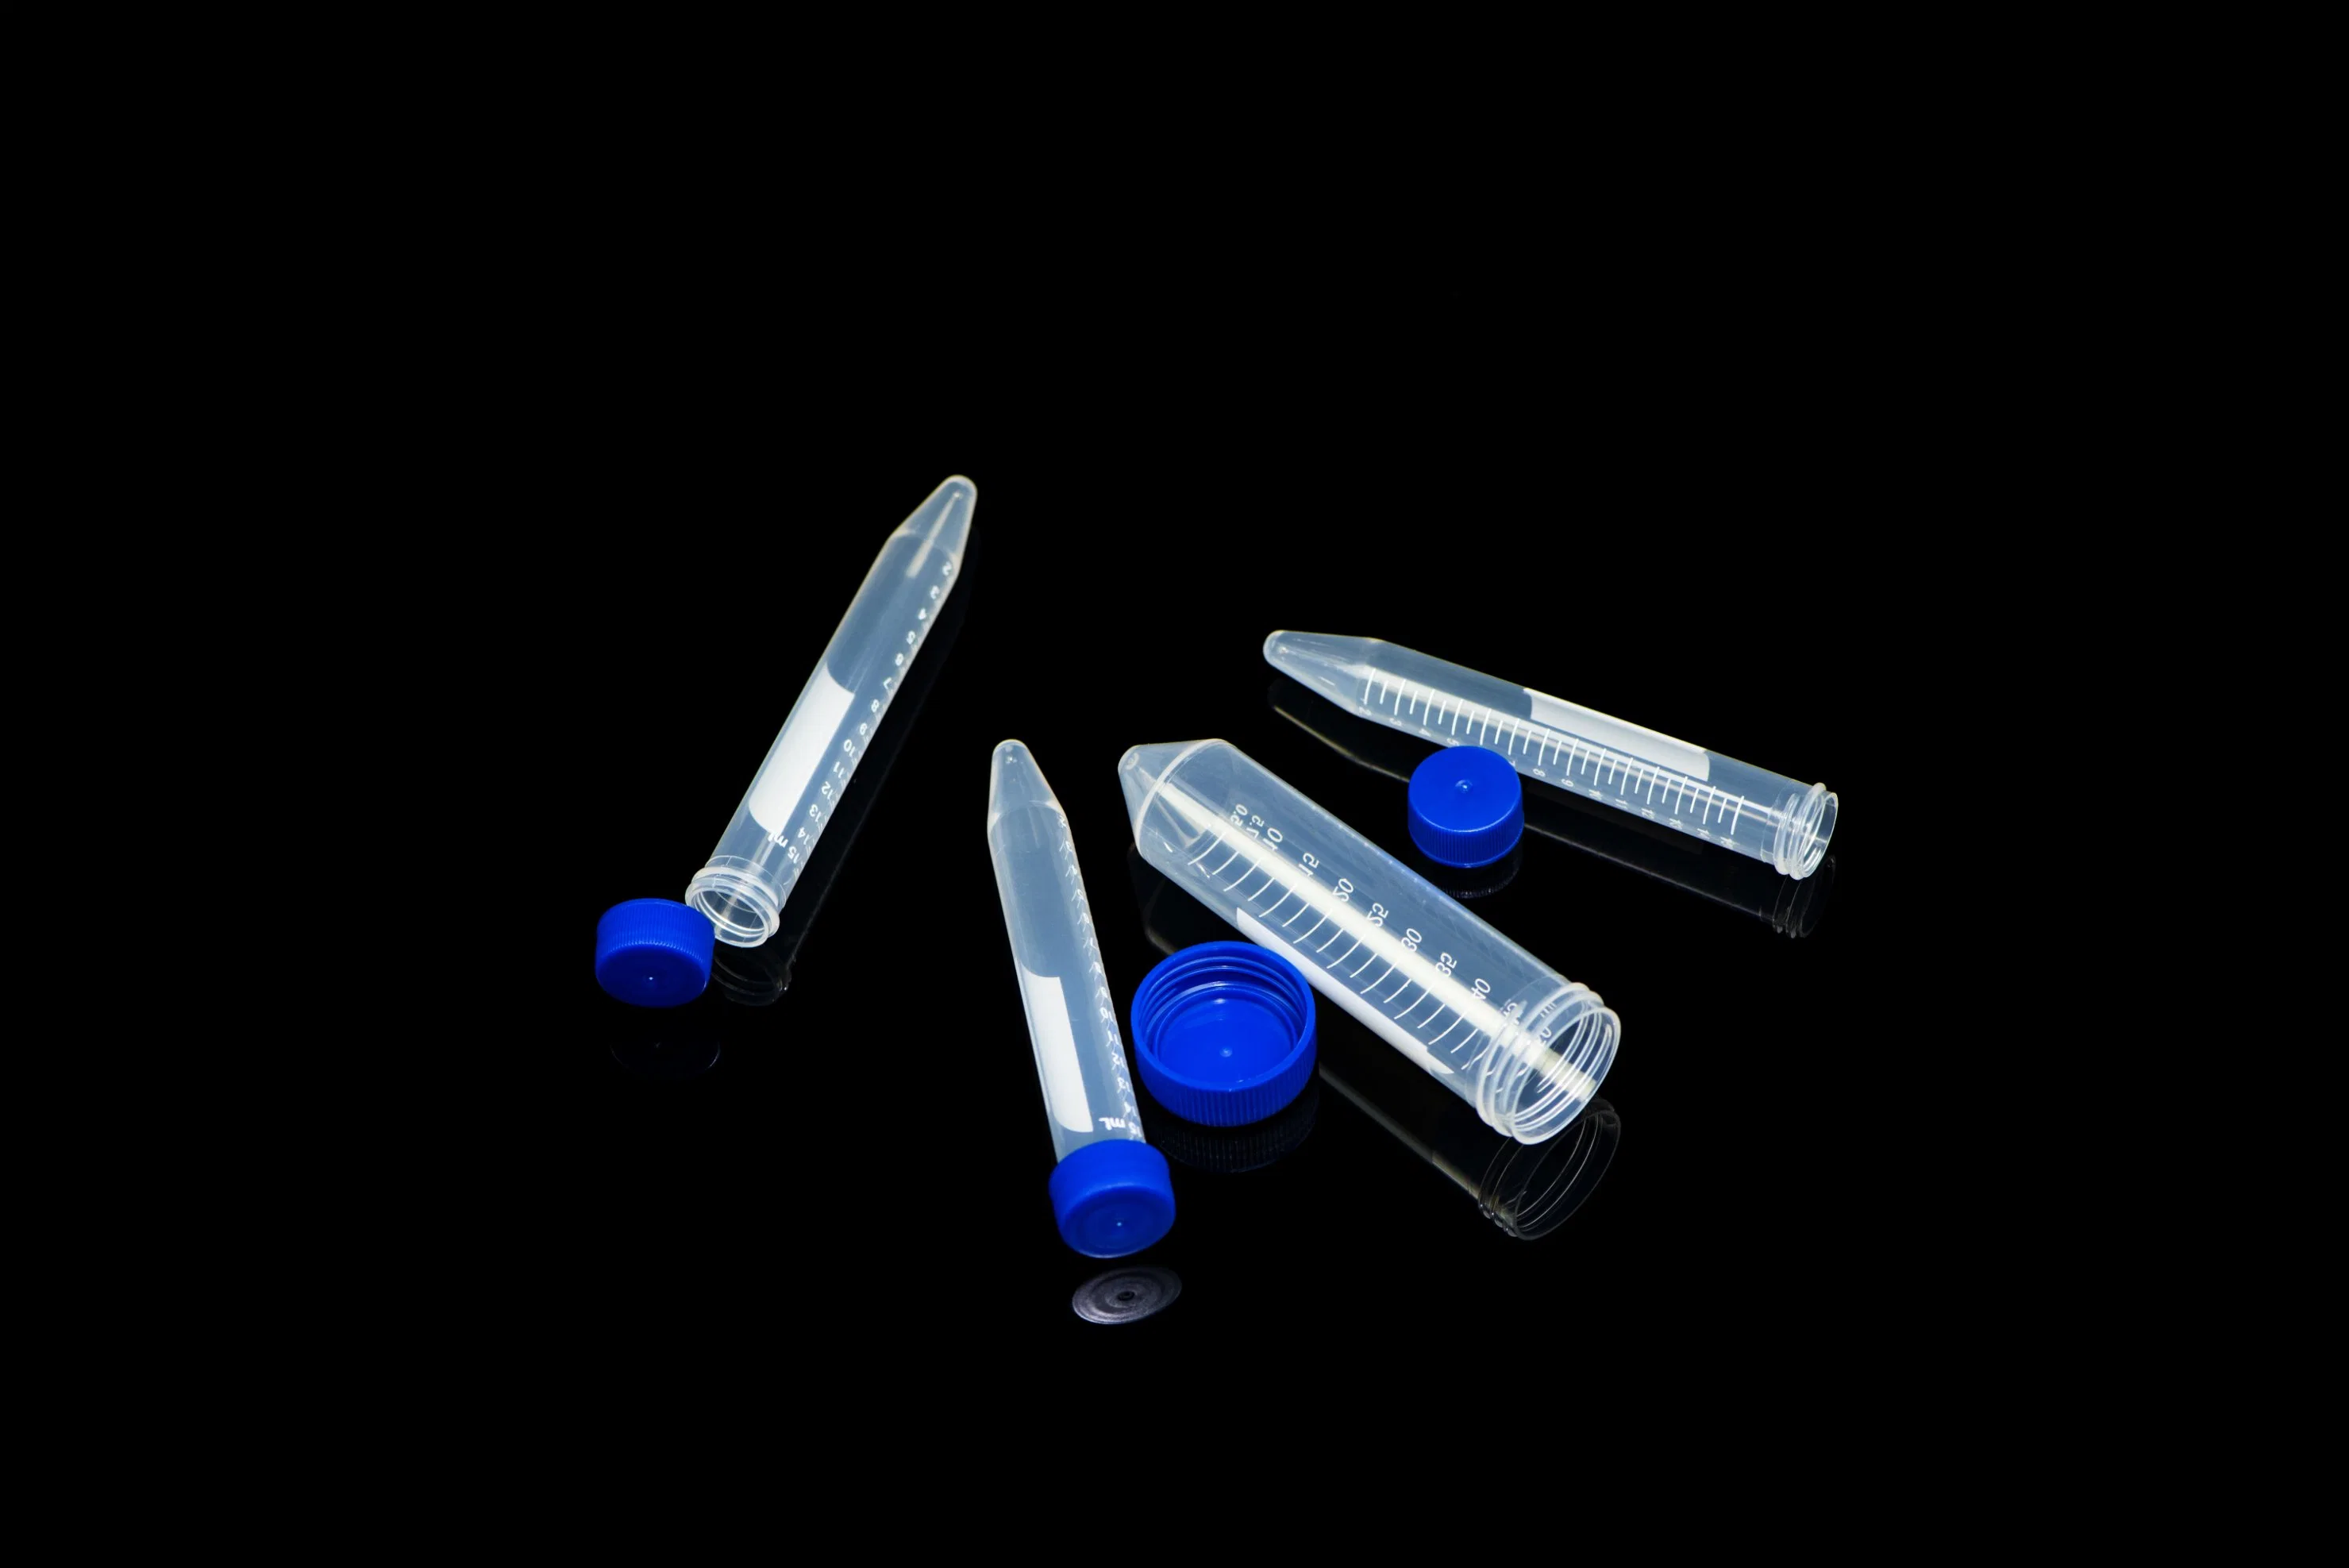 Flat-Top Cap, PP, Conical, Rack Pack, 15ml, 50ml, Sterile or Non-Sterile, CE, ISO, Disposable. Centrifuge Tubes.